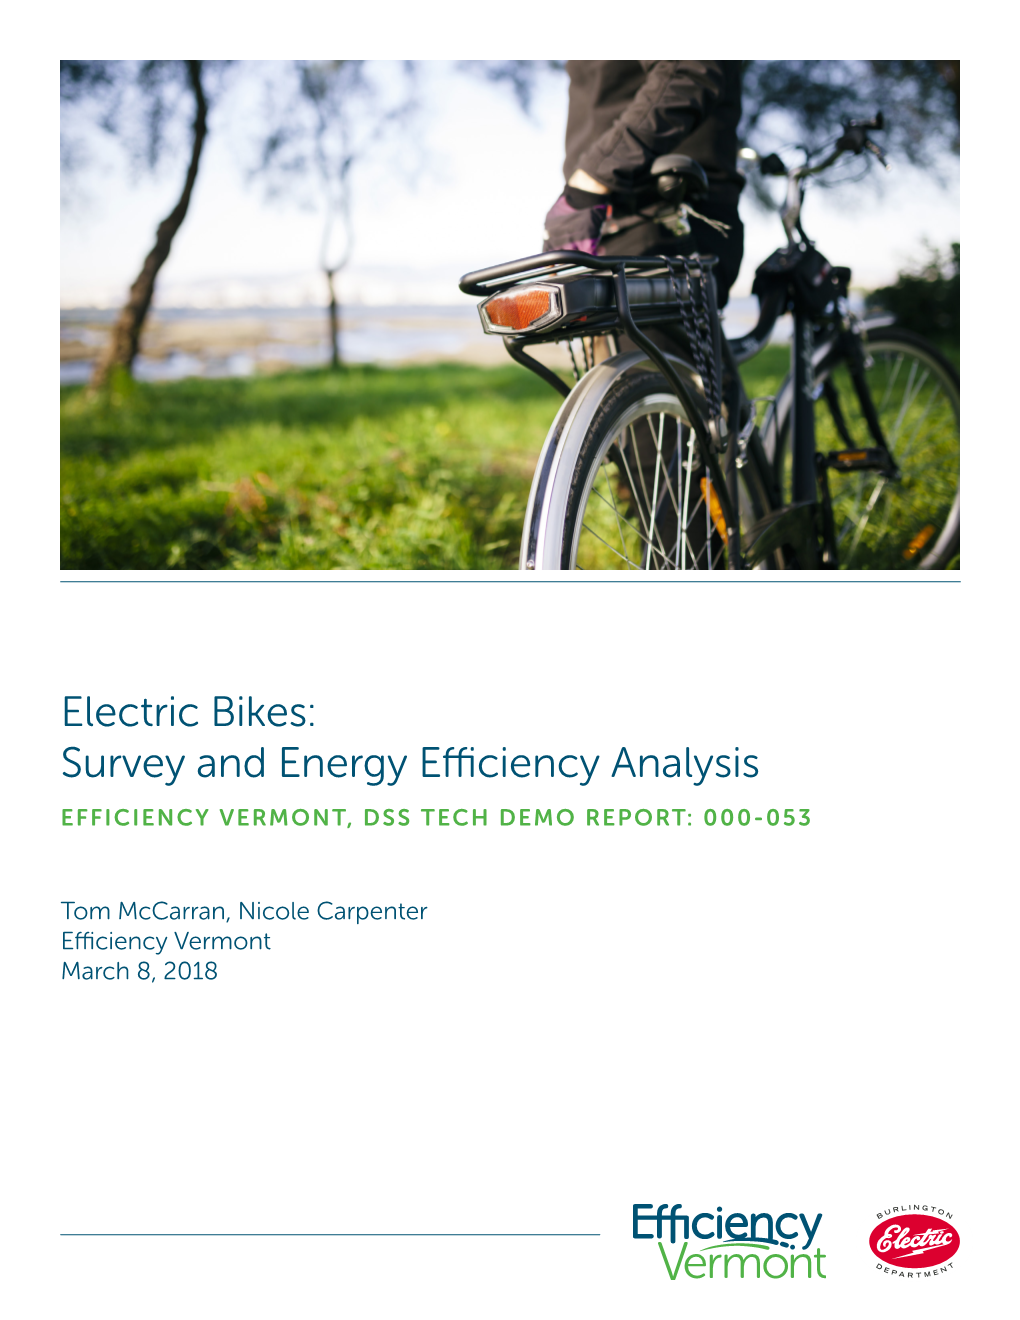 Electric Bikes: Survey and Energy Efficiency Analysis EFFICIENCY VERMONT, DSS TECH DEMO REPORT: 000-053